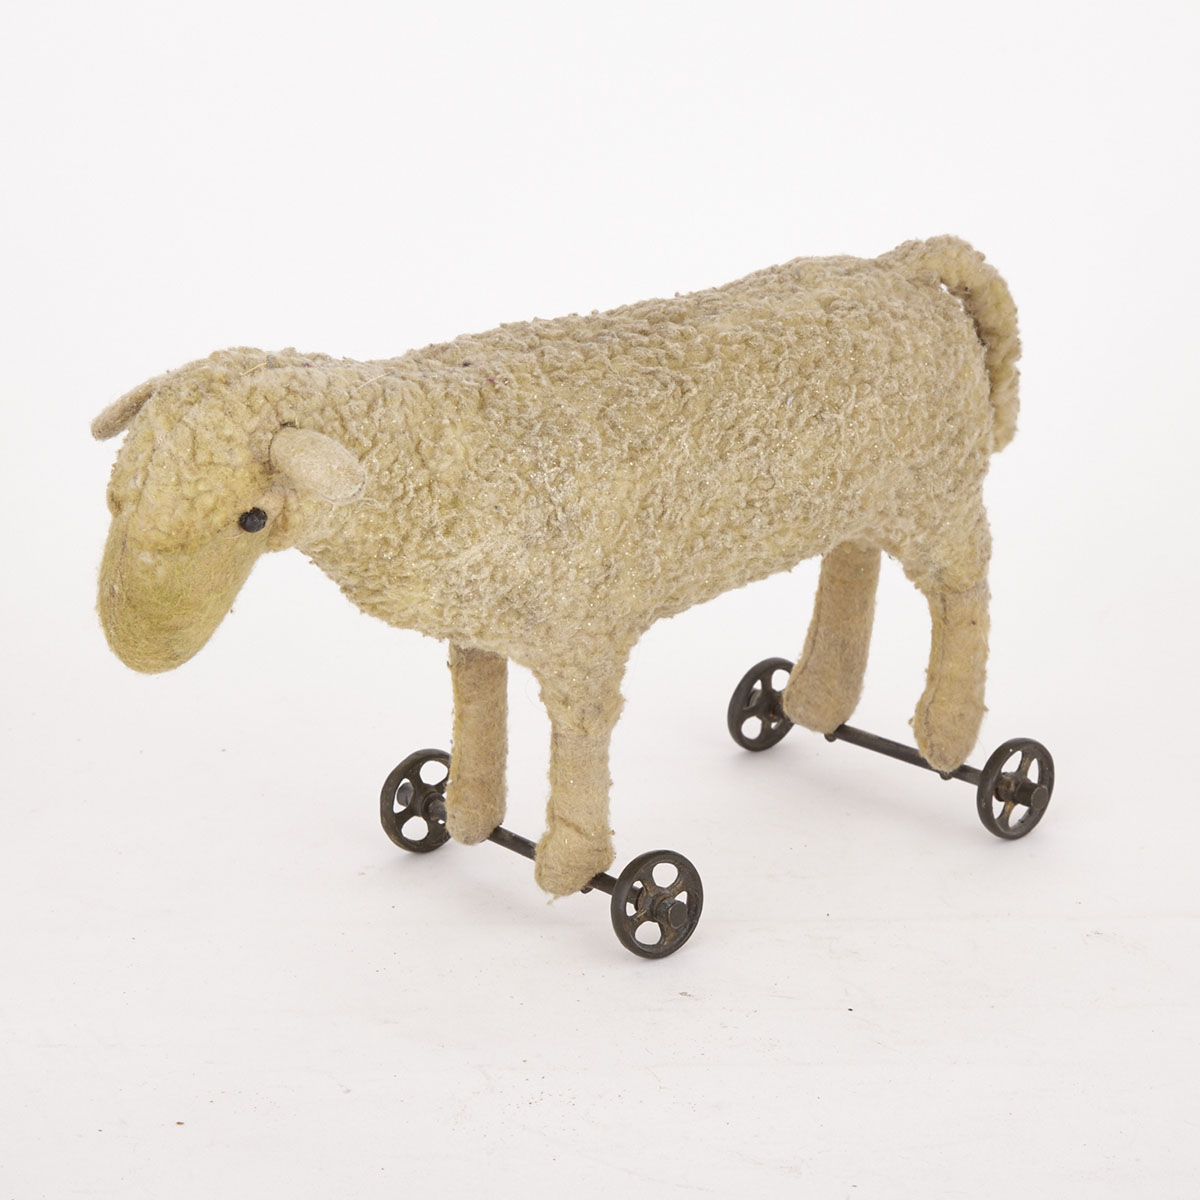 German Sheep Form Pull Toy, 19th/early 20th century